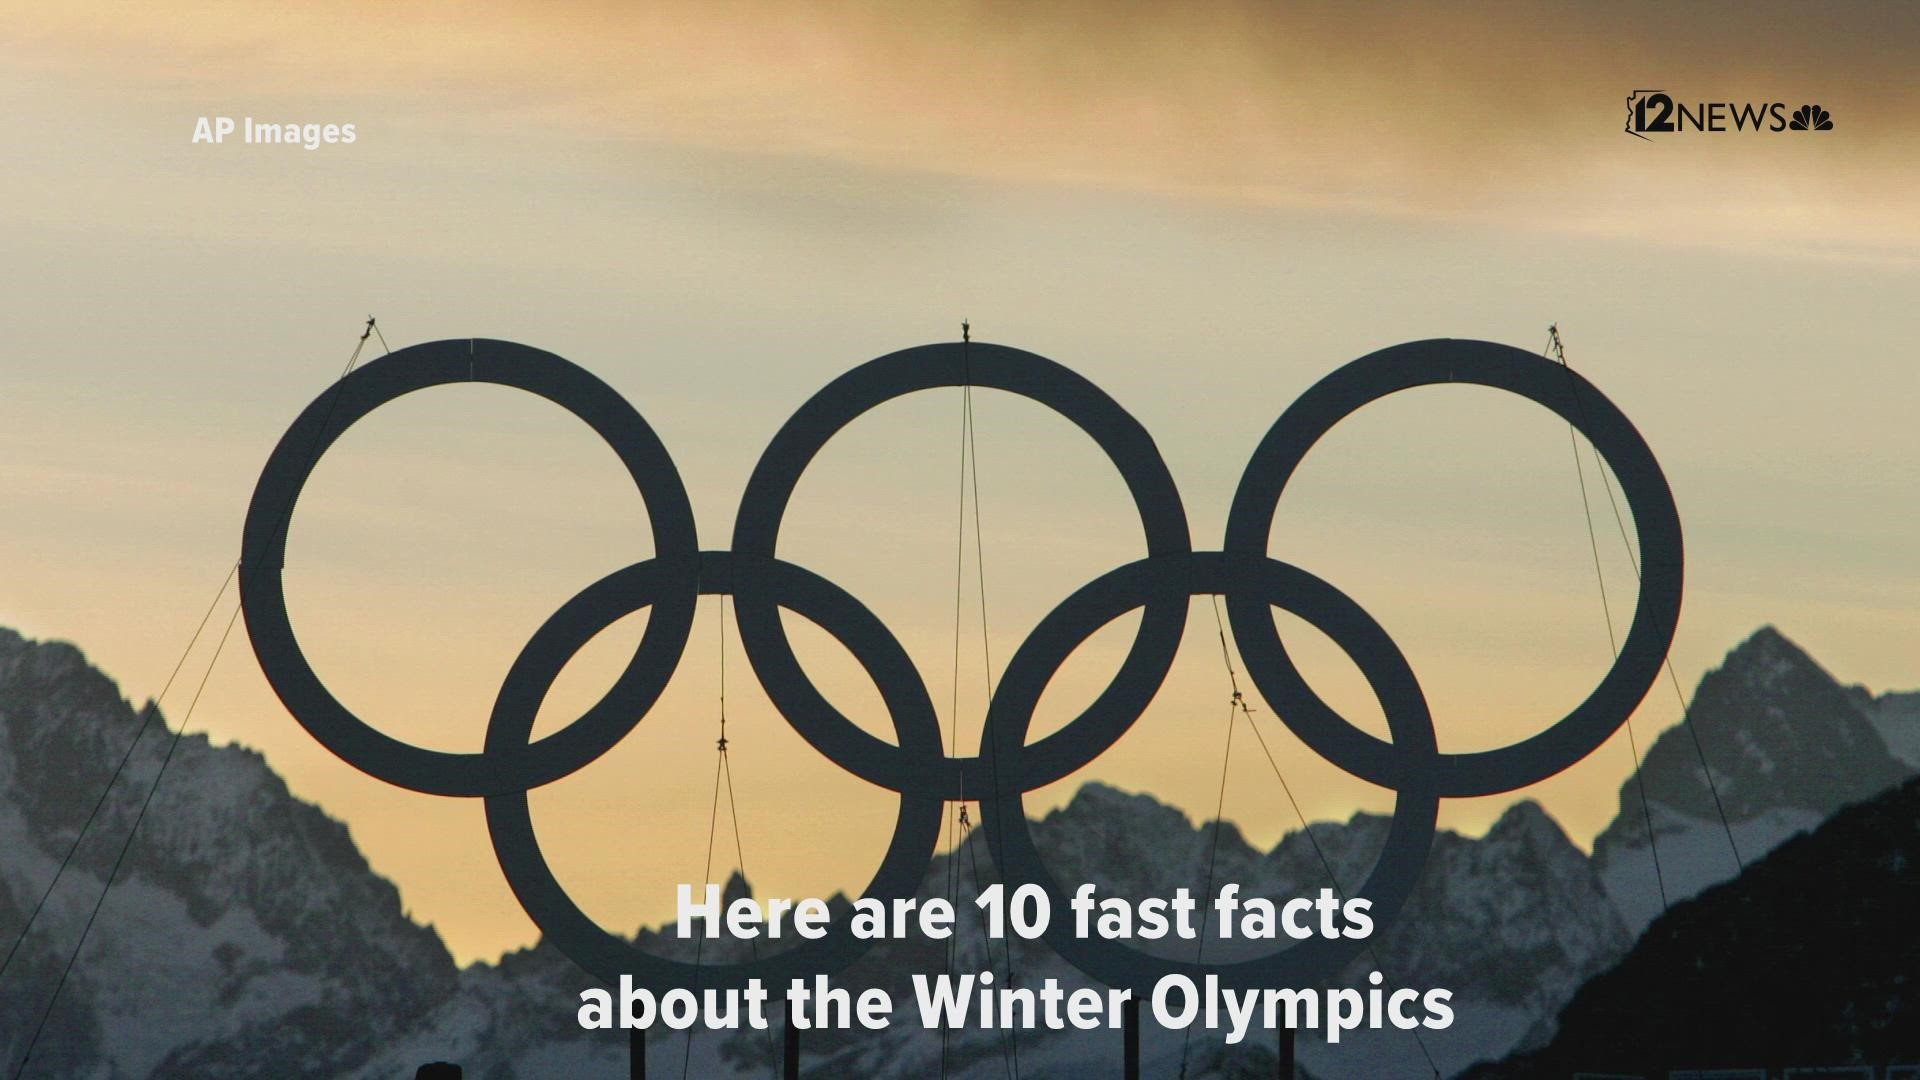 The 2022 Winter Olympics will be held in Beijing. Here are 10 fast facts to know about the host city and the Winter Olympics!